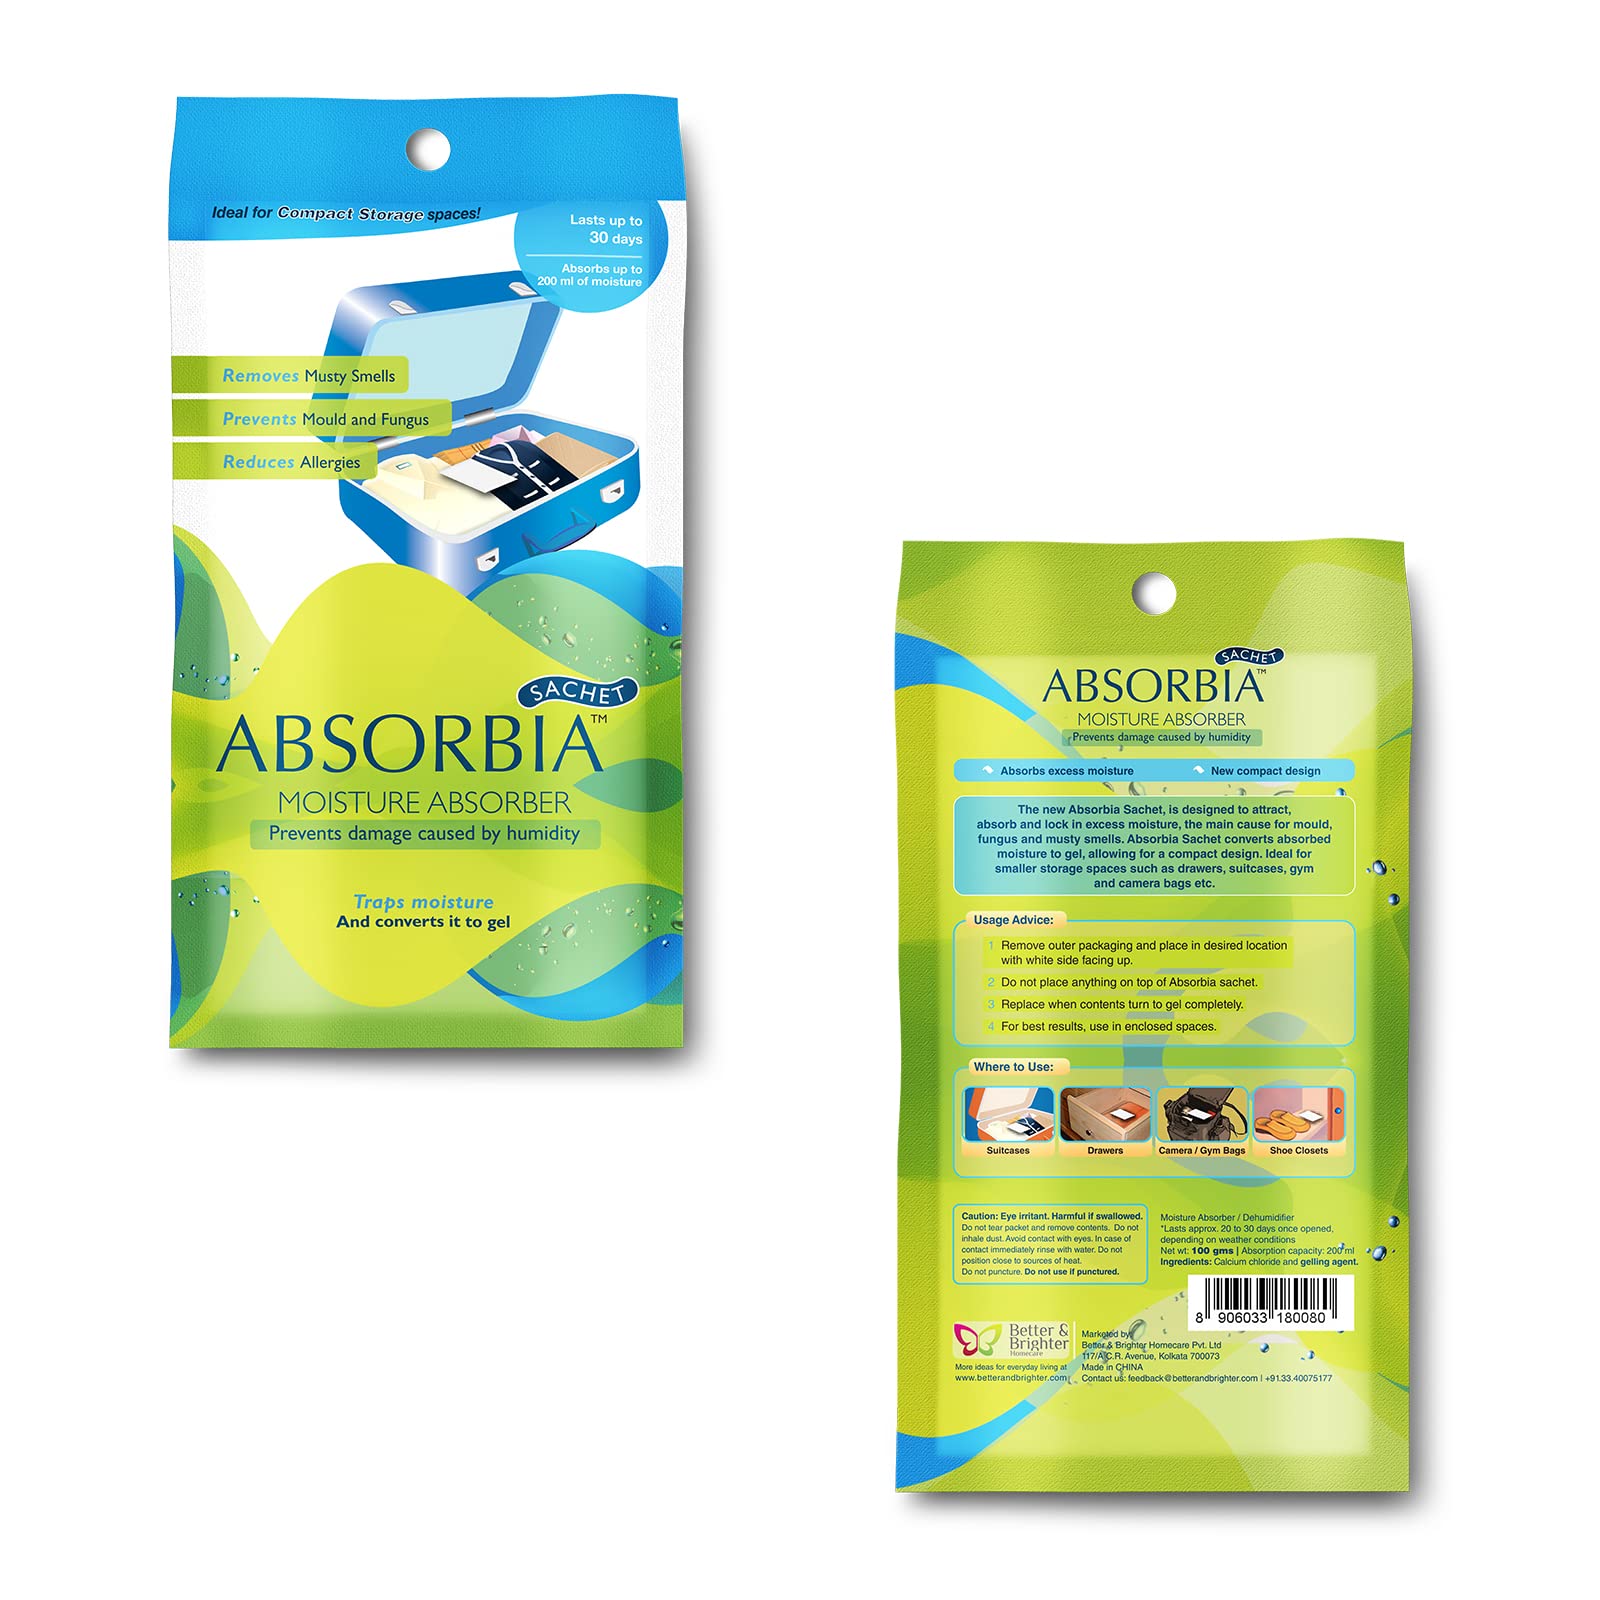 Absorbia Moisture Absorber Odour Buster with Activated Charcoal Pack of 6(300g each)|Absorbia Sachet - Pack of 6 (100g each) | Dehumidifier for Wardrobe, Cupboards & Closets…